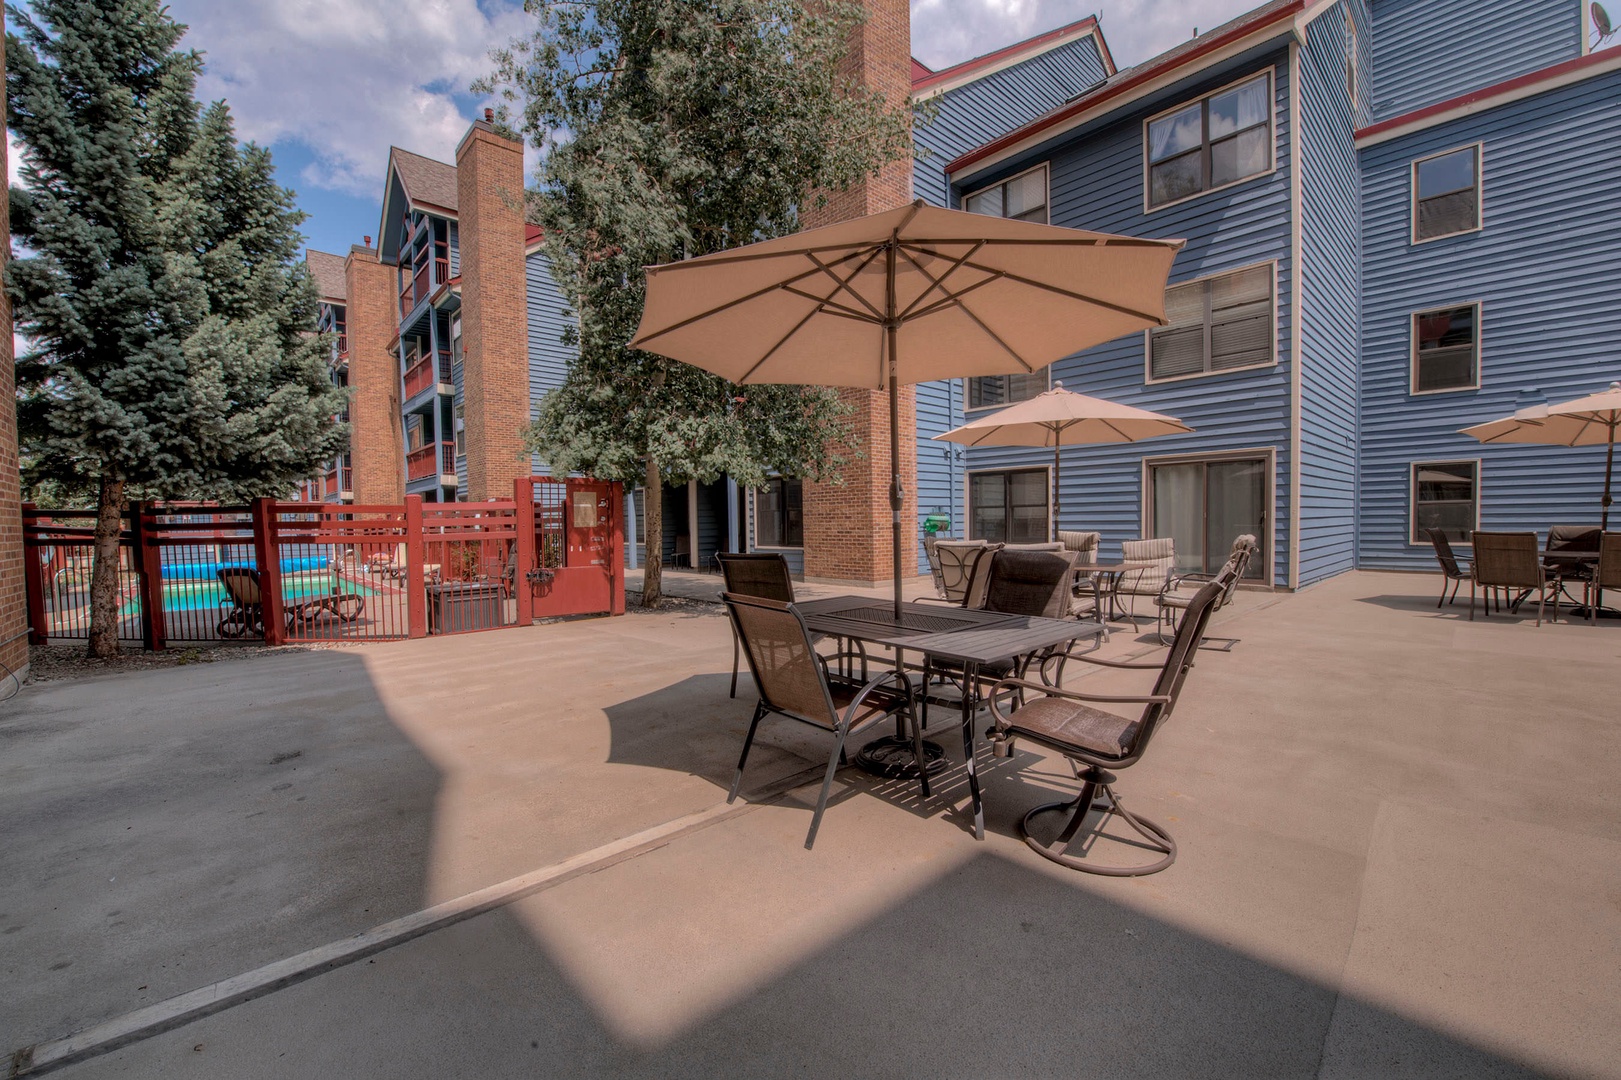 Shared condo complex patio seating and BBQ area